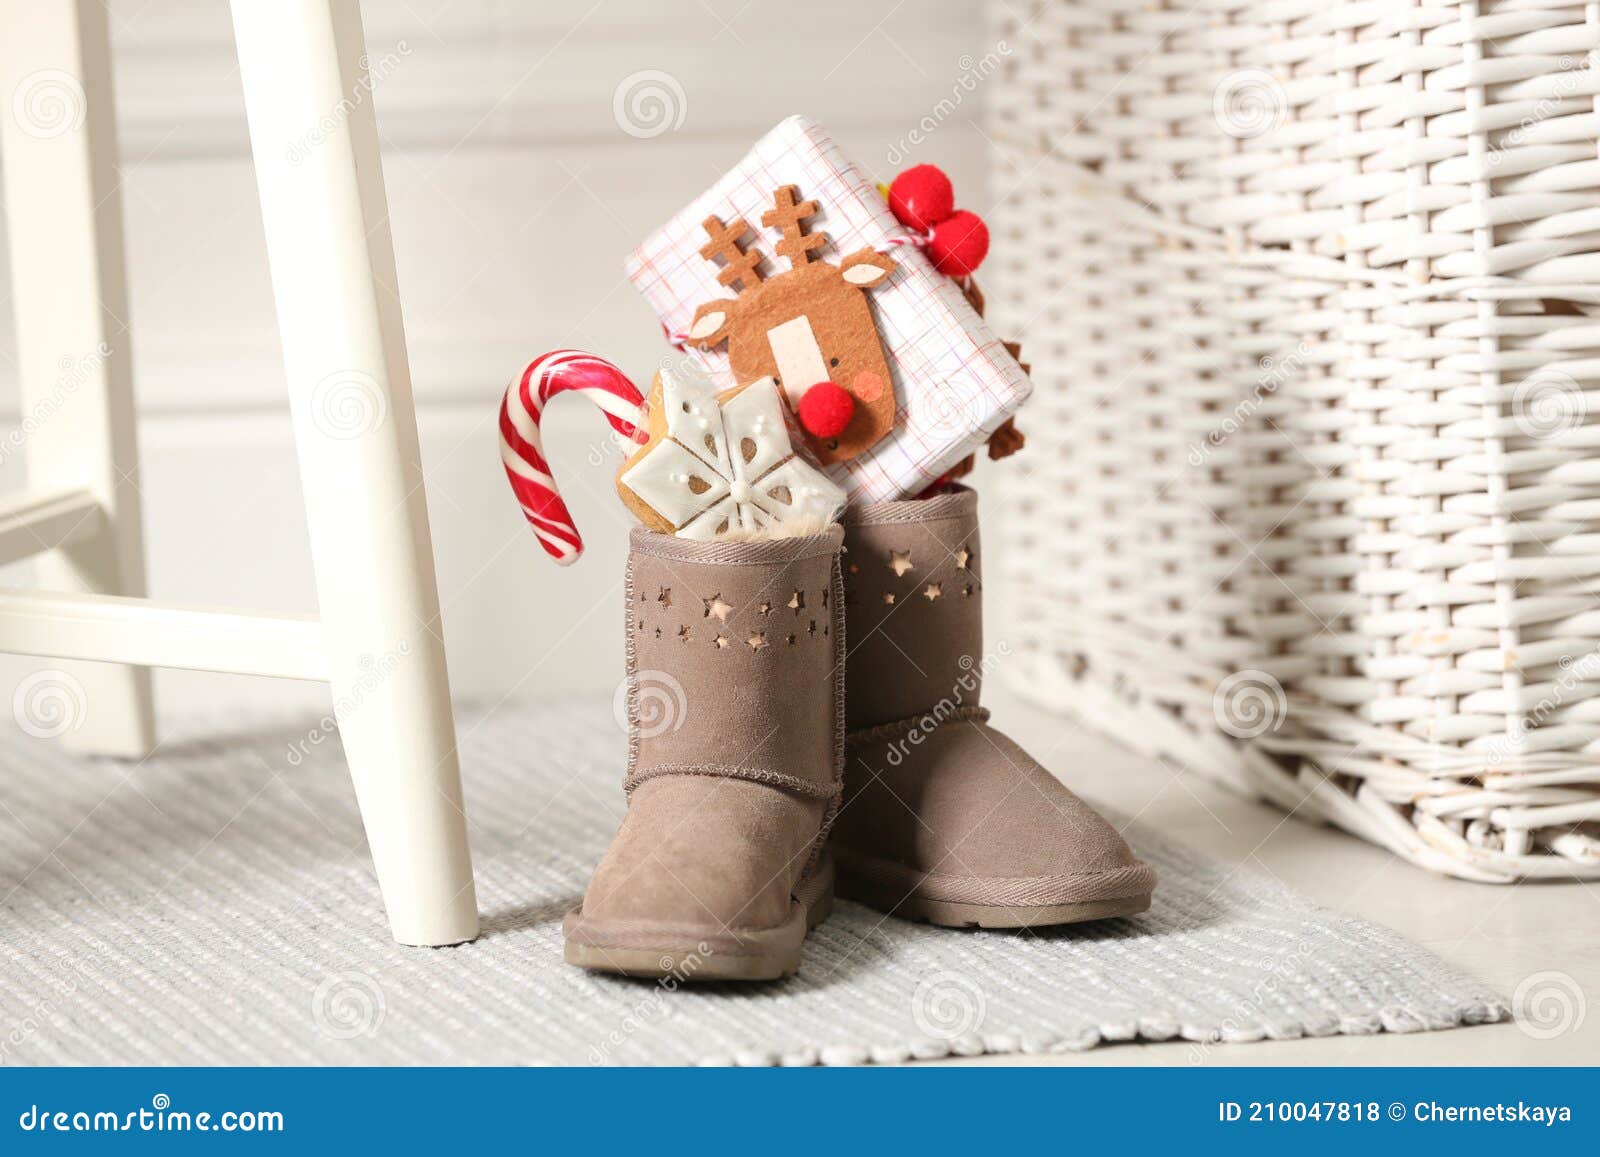 Chronicle weapon Stadium Sweets and Gift Box in Child`s Boots Indoors. St. Nicholas Day Tradition  Stock Photo - Image of background, seasonal: 210047818